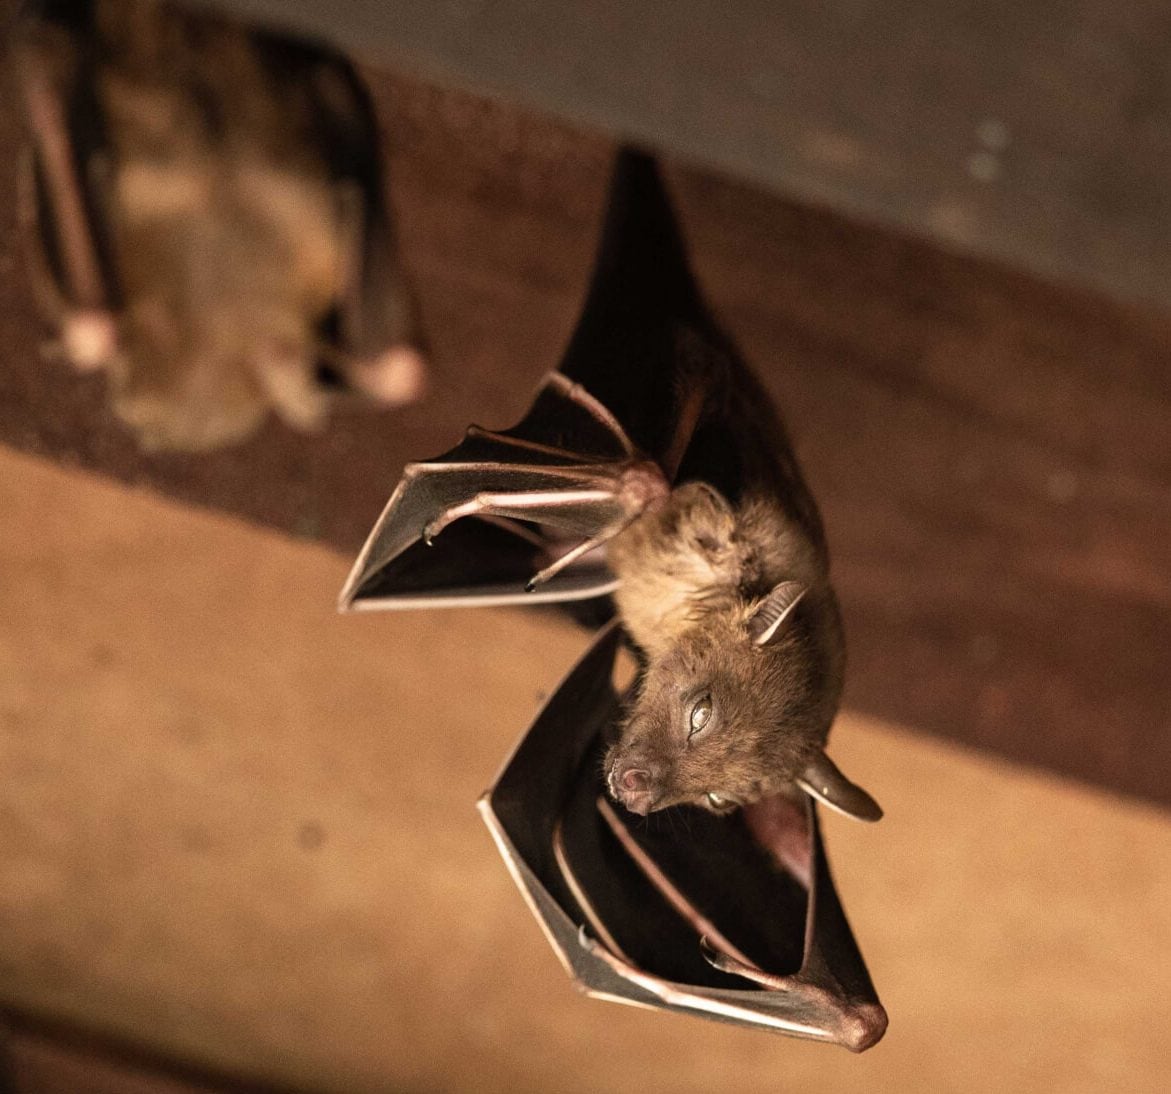 Expert bat removal services for a safe and humane solution in Shreveport